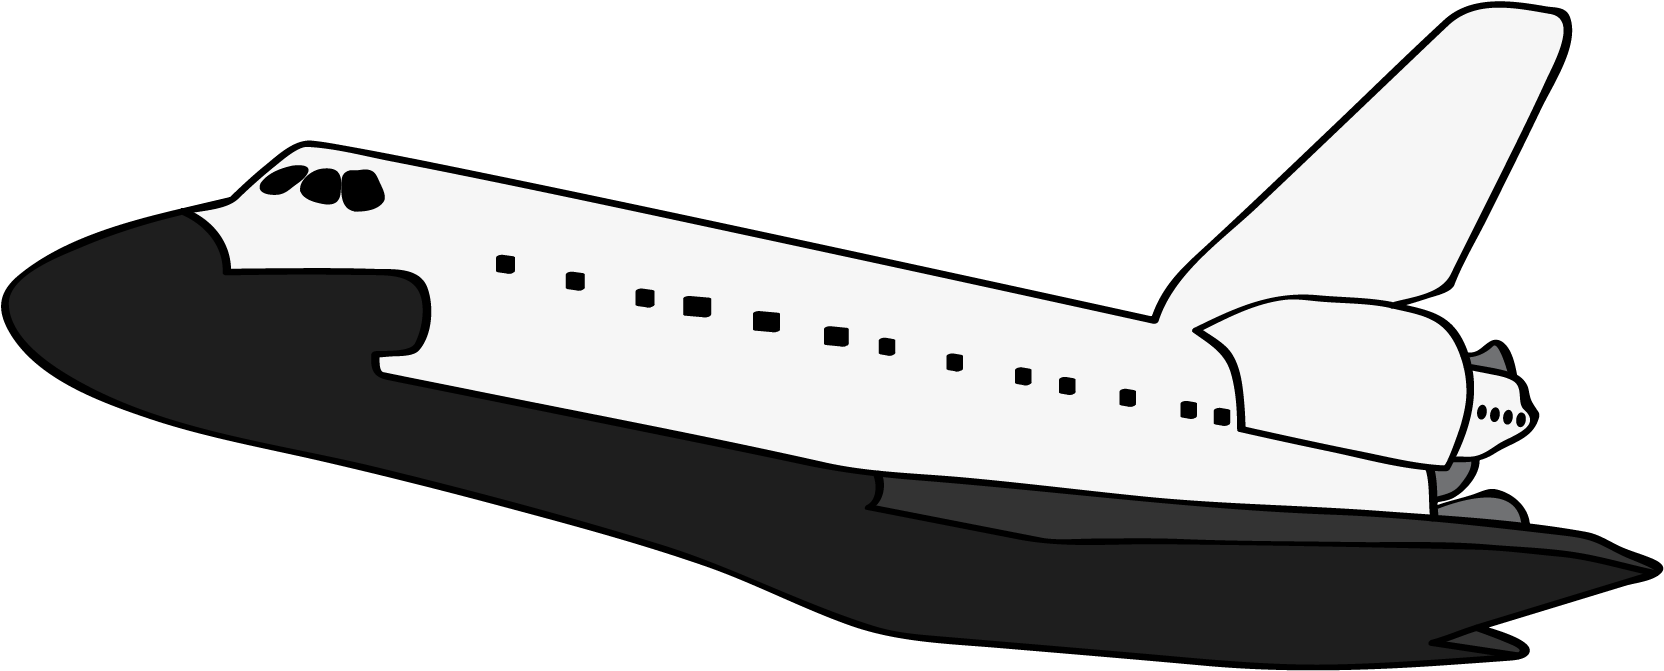 Airplane Landing Animated Gif Airplane Jet Cartoon - Space Shuttle Black And White (1817x803)